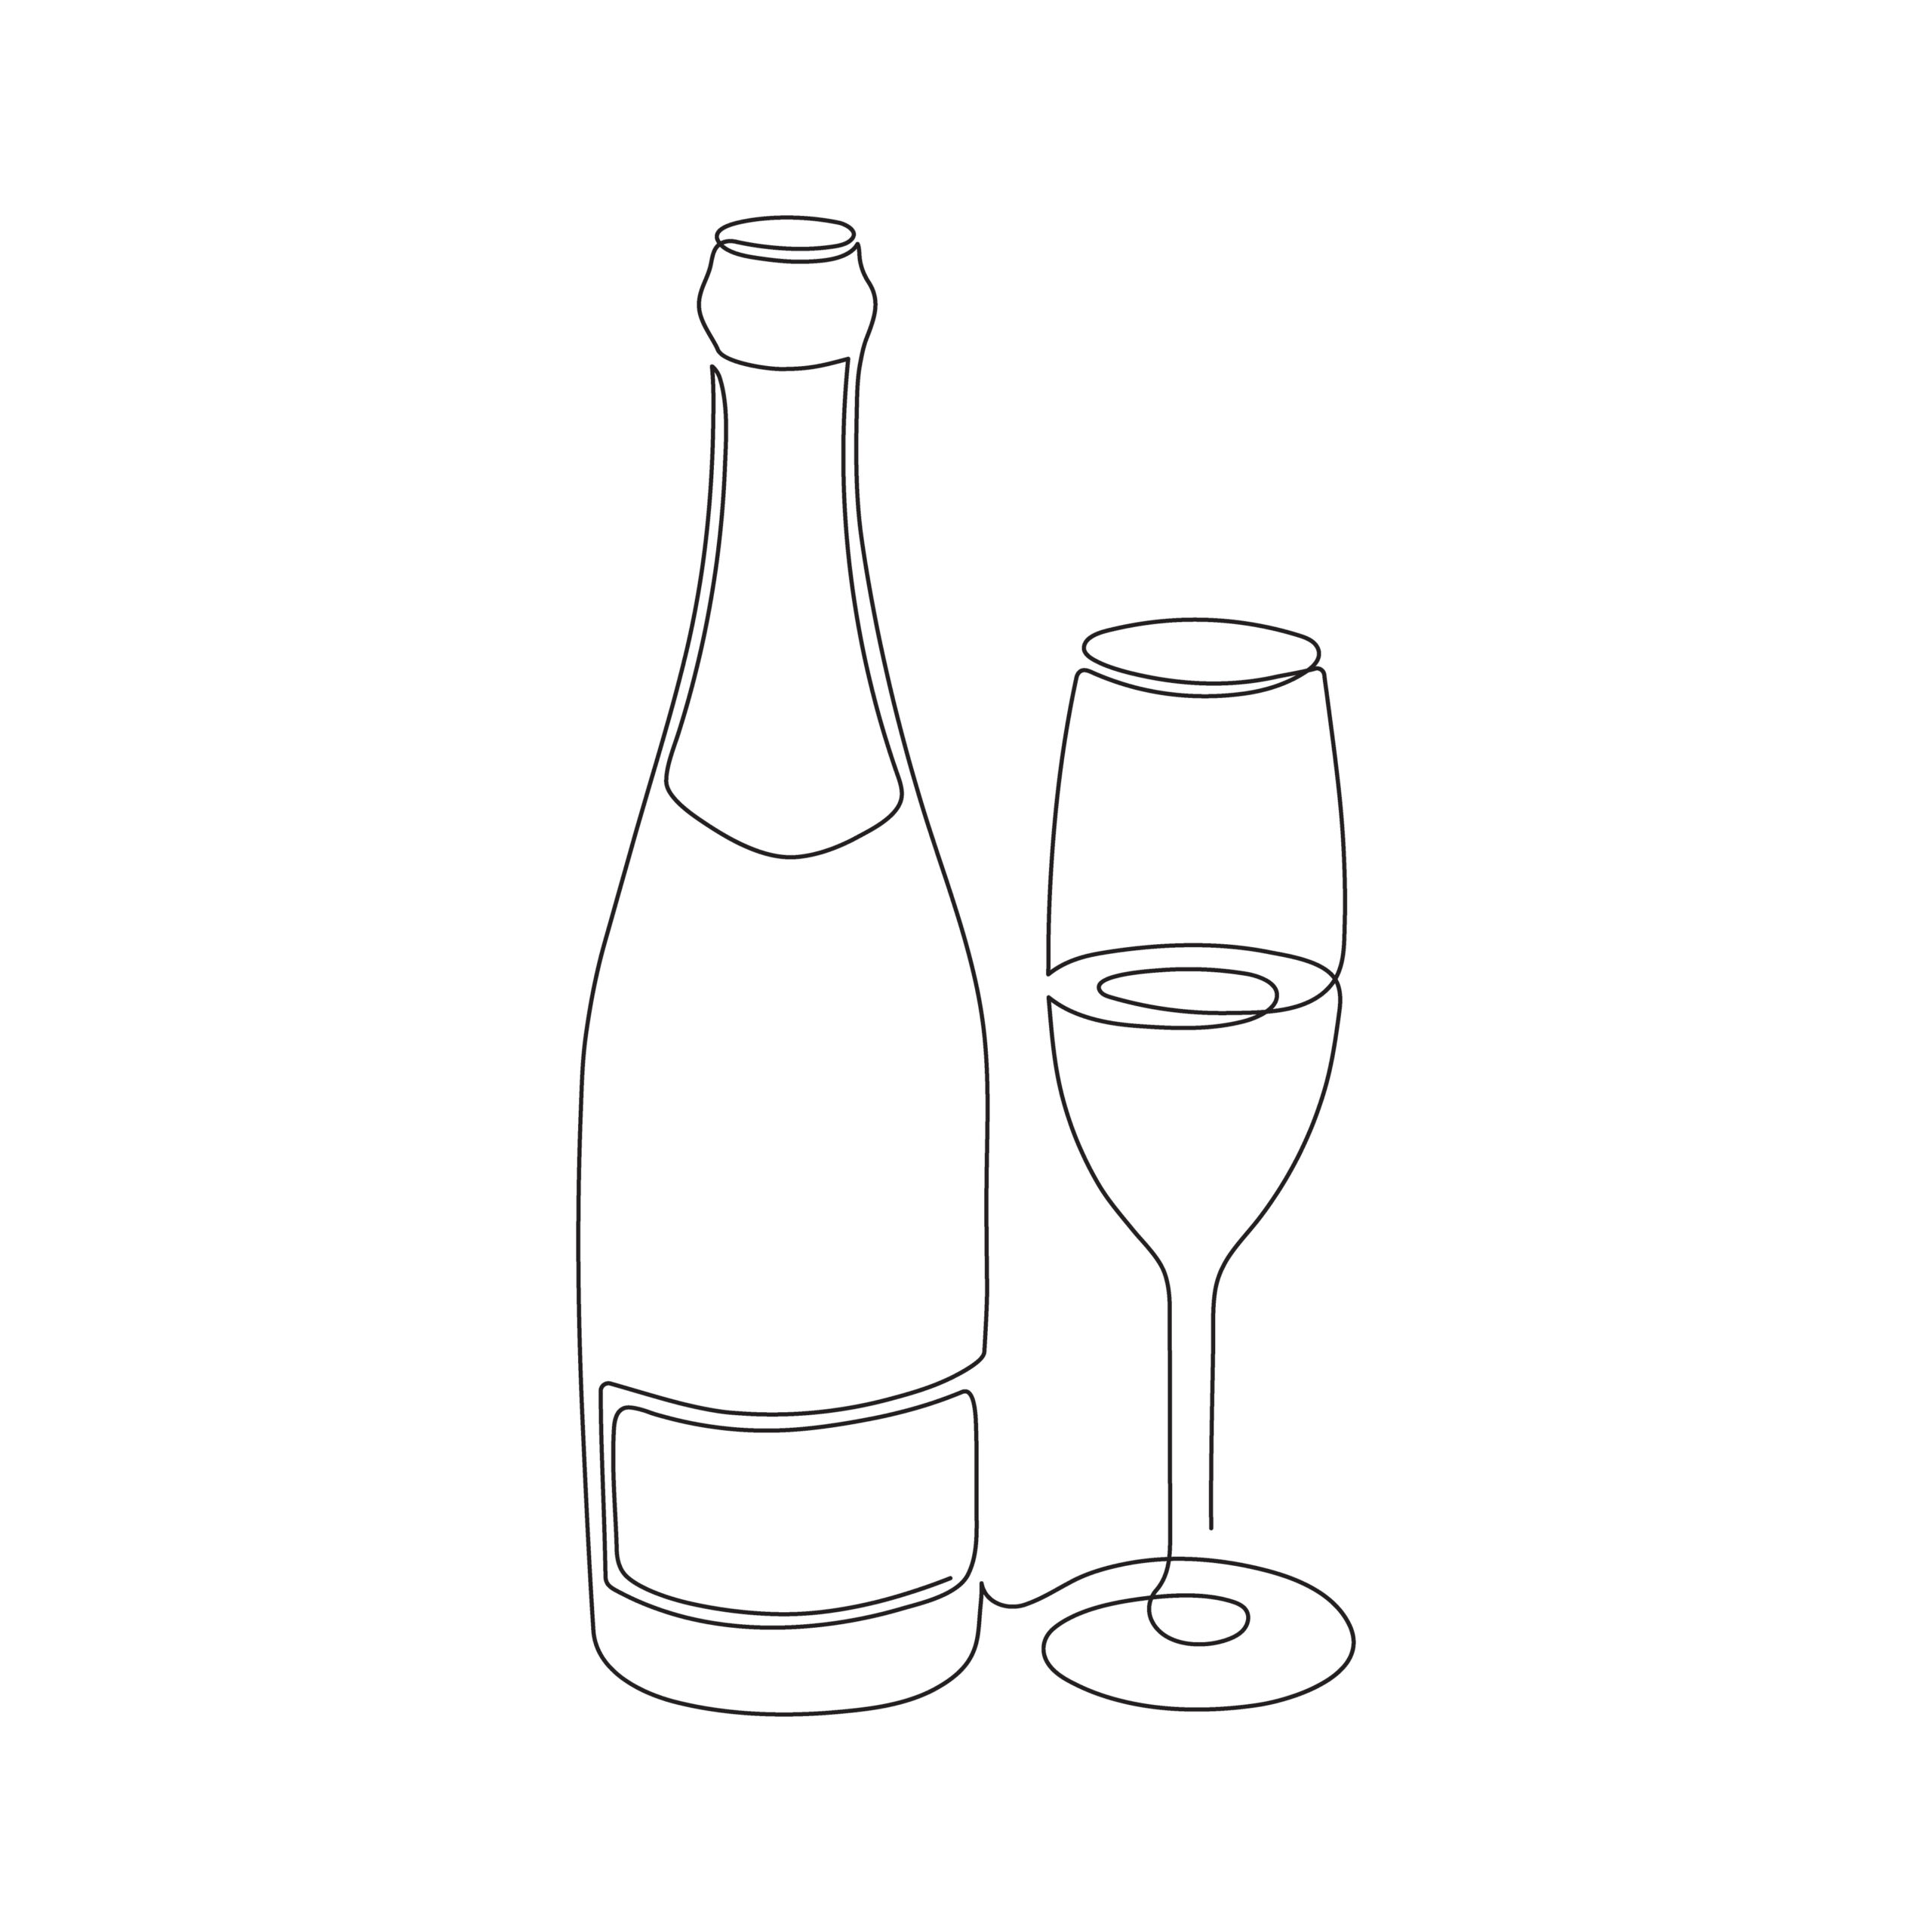 Hand drawn bottle of champagne and glass drawn in one continuous line